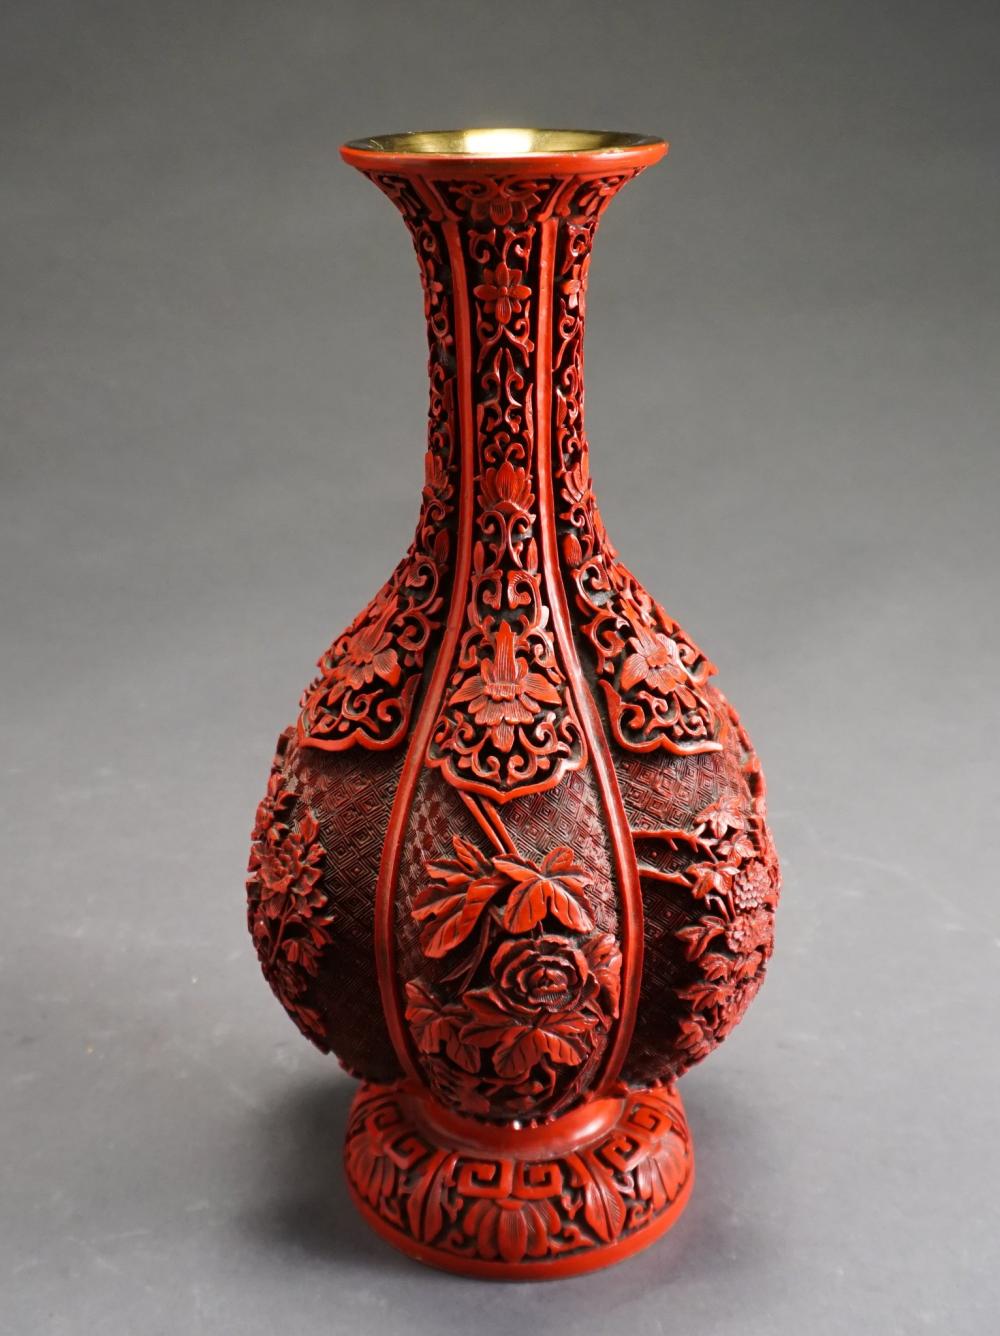 SOUTHEAST ASIAN FLORAL CARVED CINNABAR